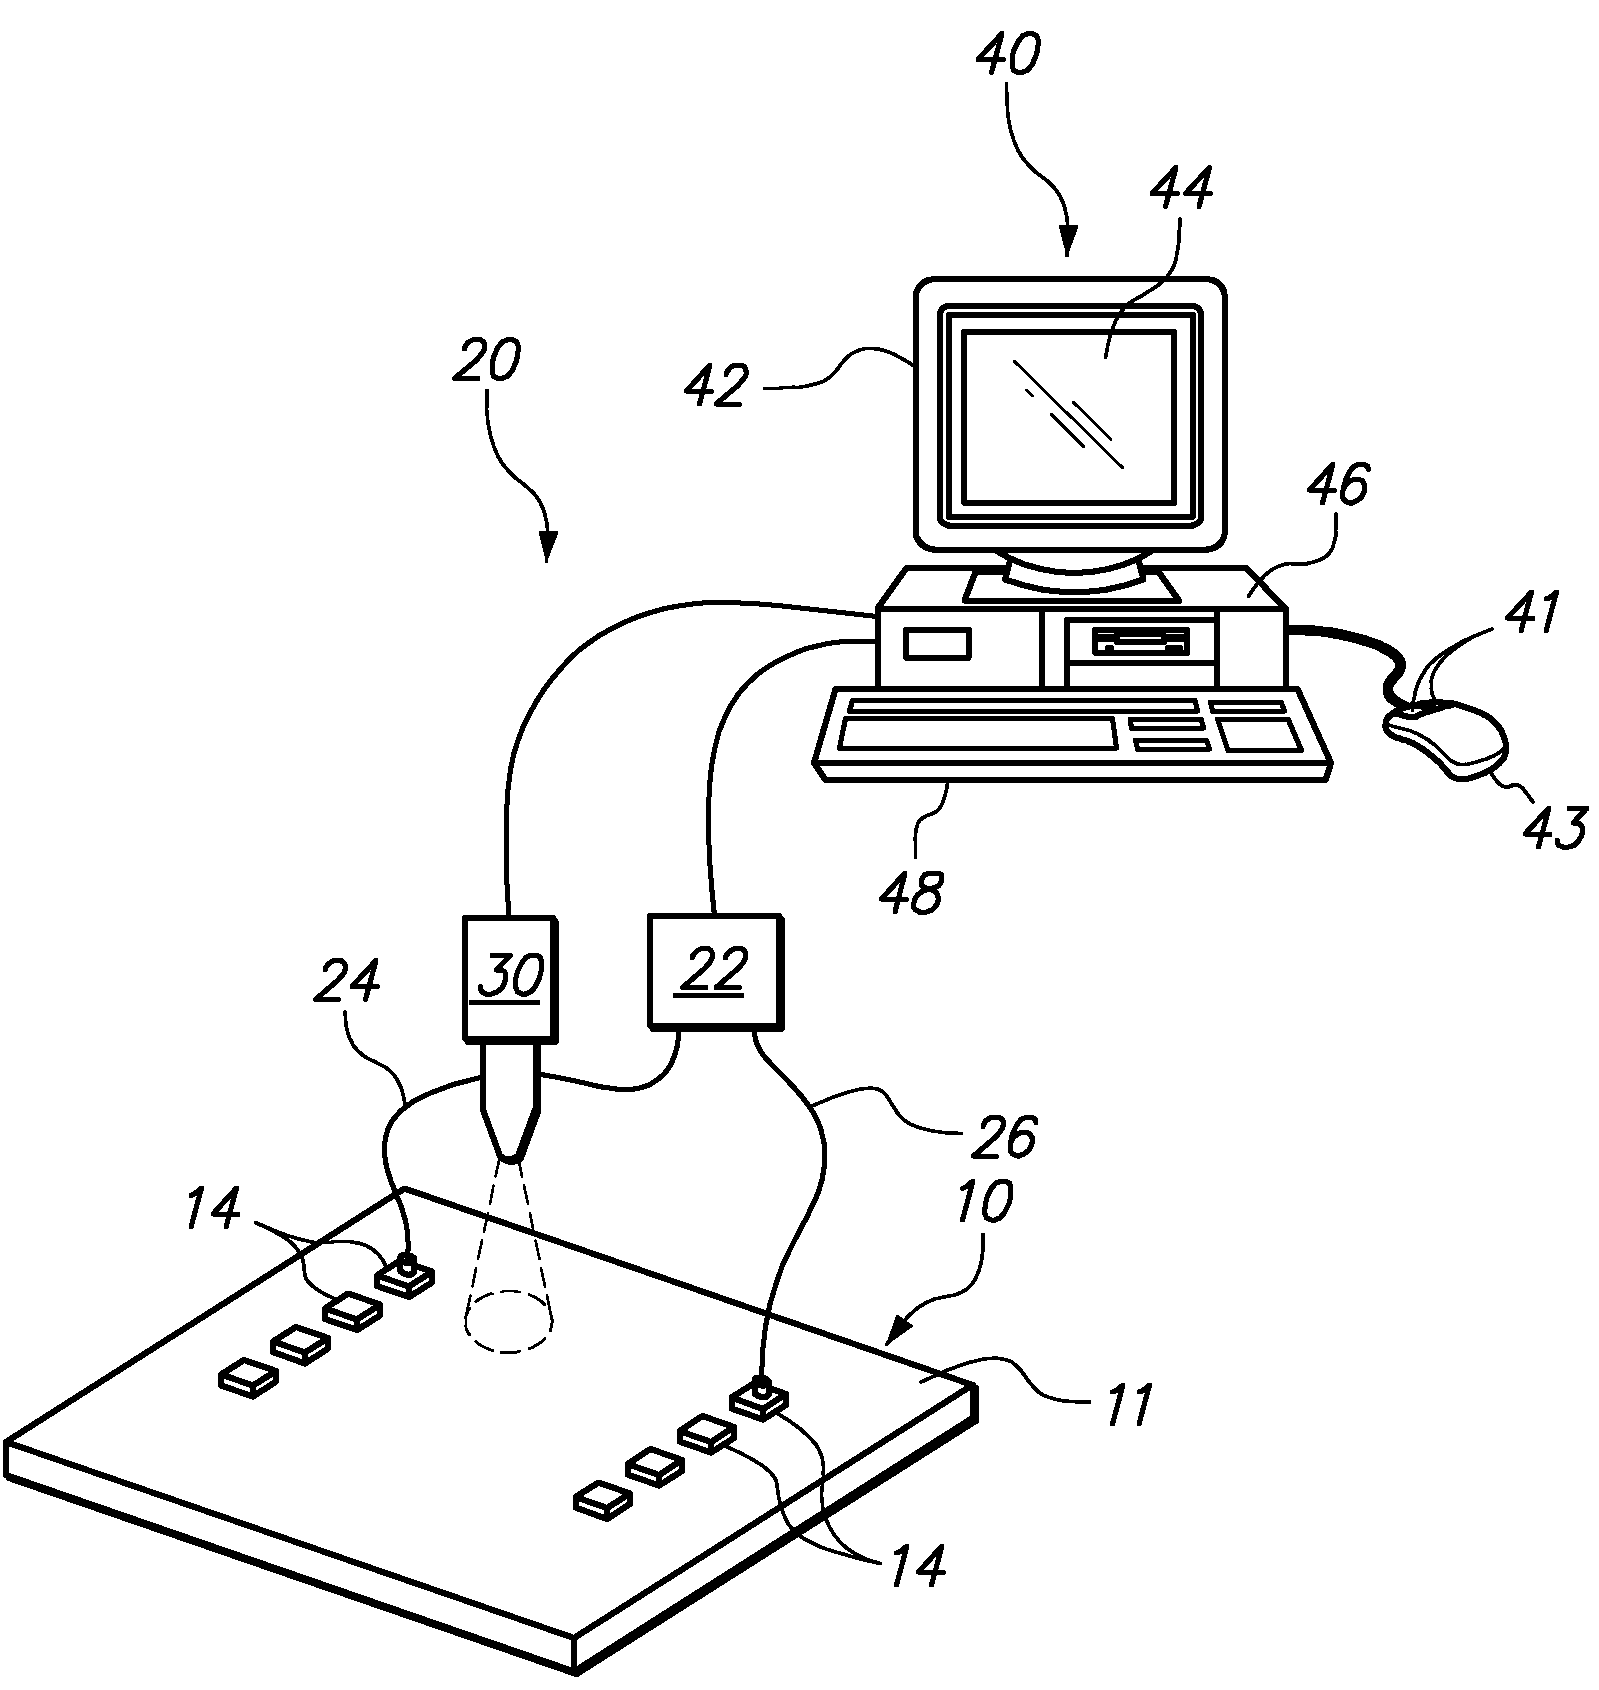 Method for validating printed circuit board materials for high speed applications